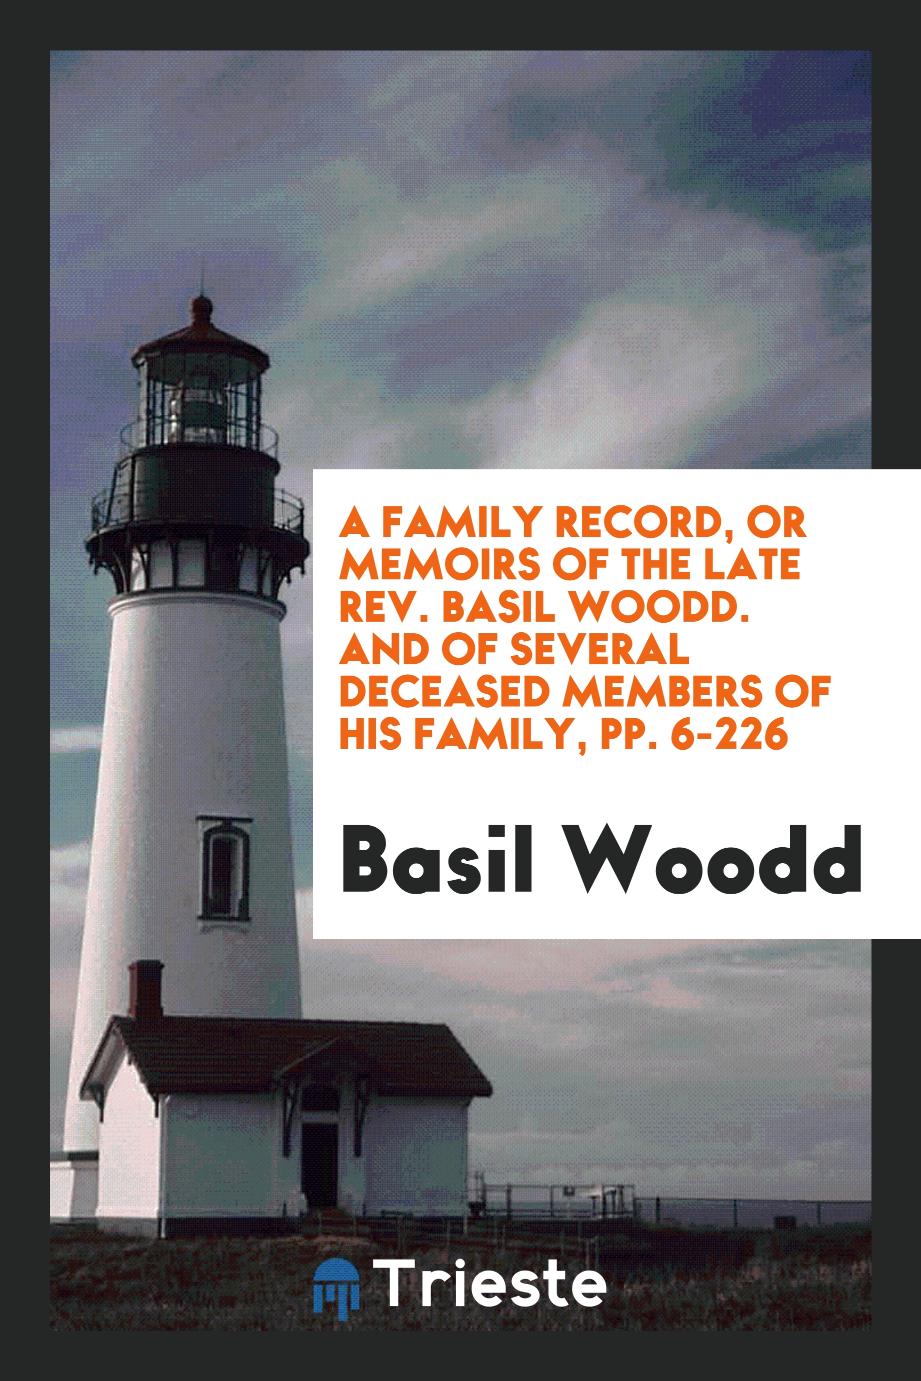 A Family Record, or Memoirs of the Late Rev. Basil Woodd. And of Several Deceased Members of His Family, pp. 6-226